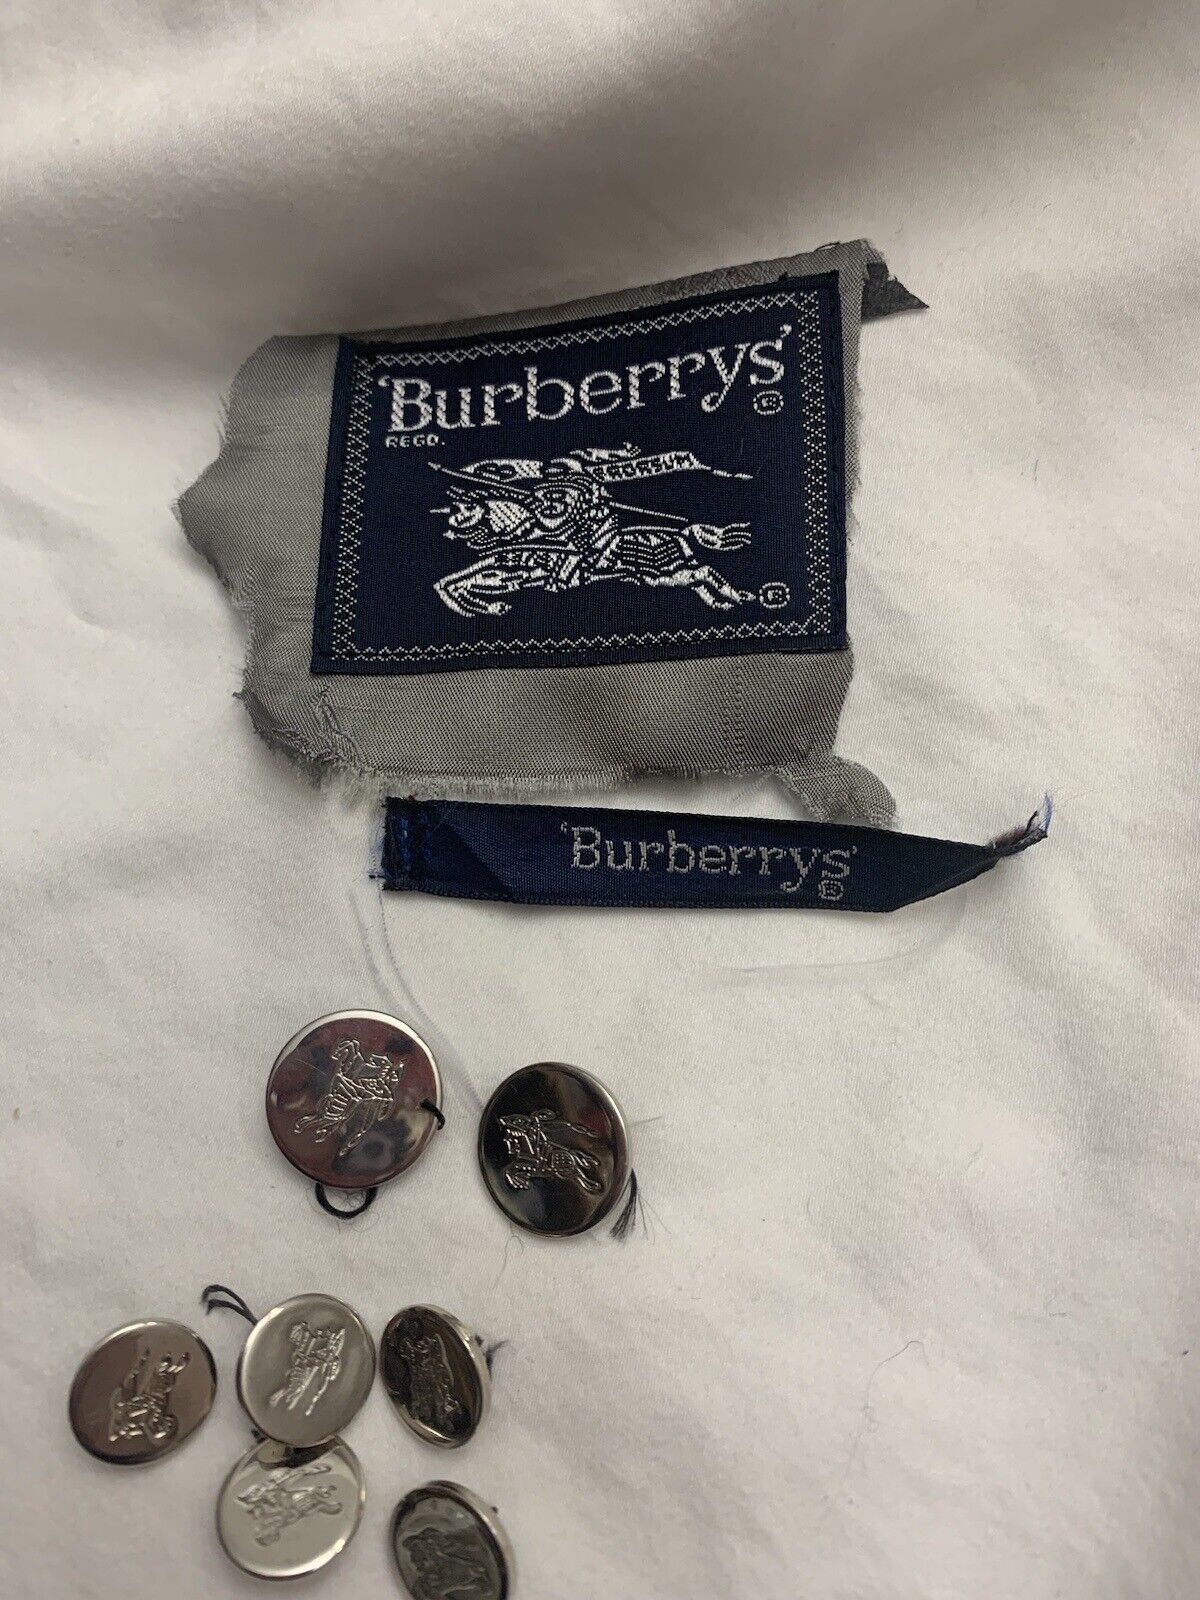 Burberrys Prorsum replacement buttons 7 Silver tone solid metal  Good Used Cond.